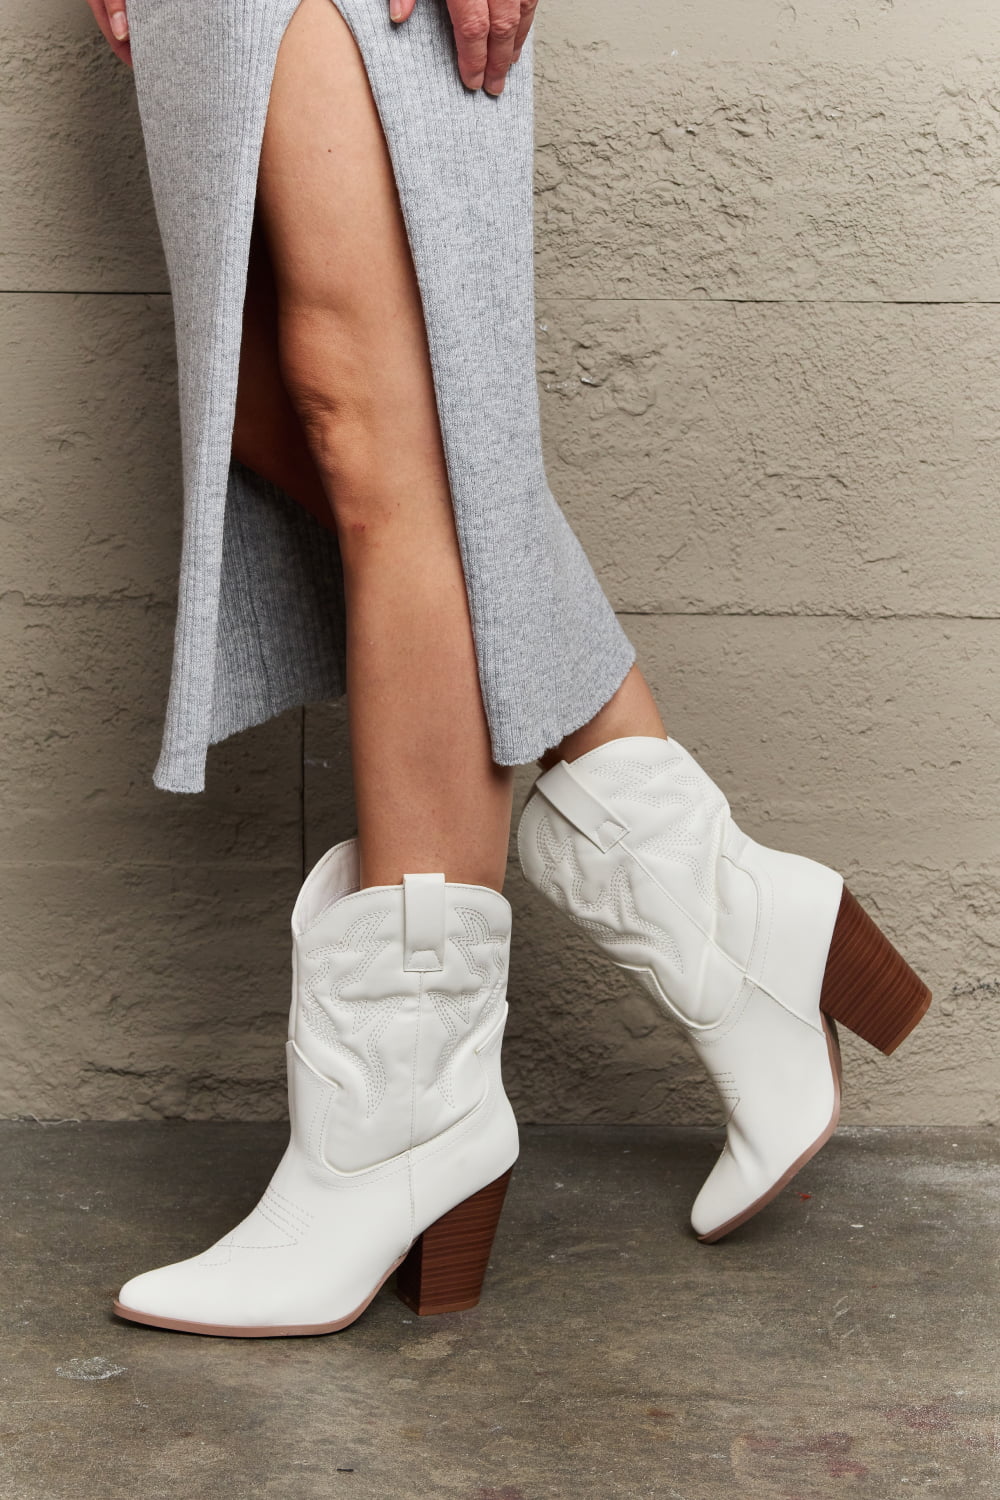 Bella Cowboy Boots in White  Southern Soul Collectives 